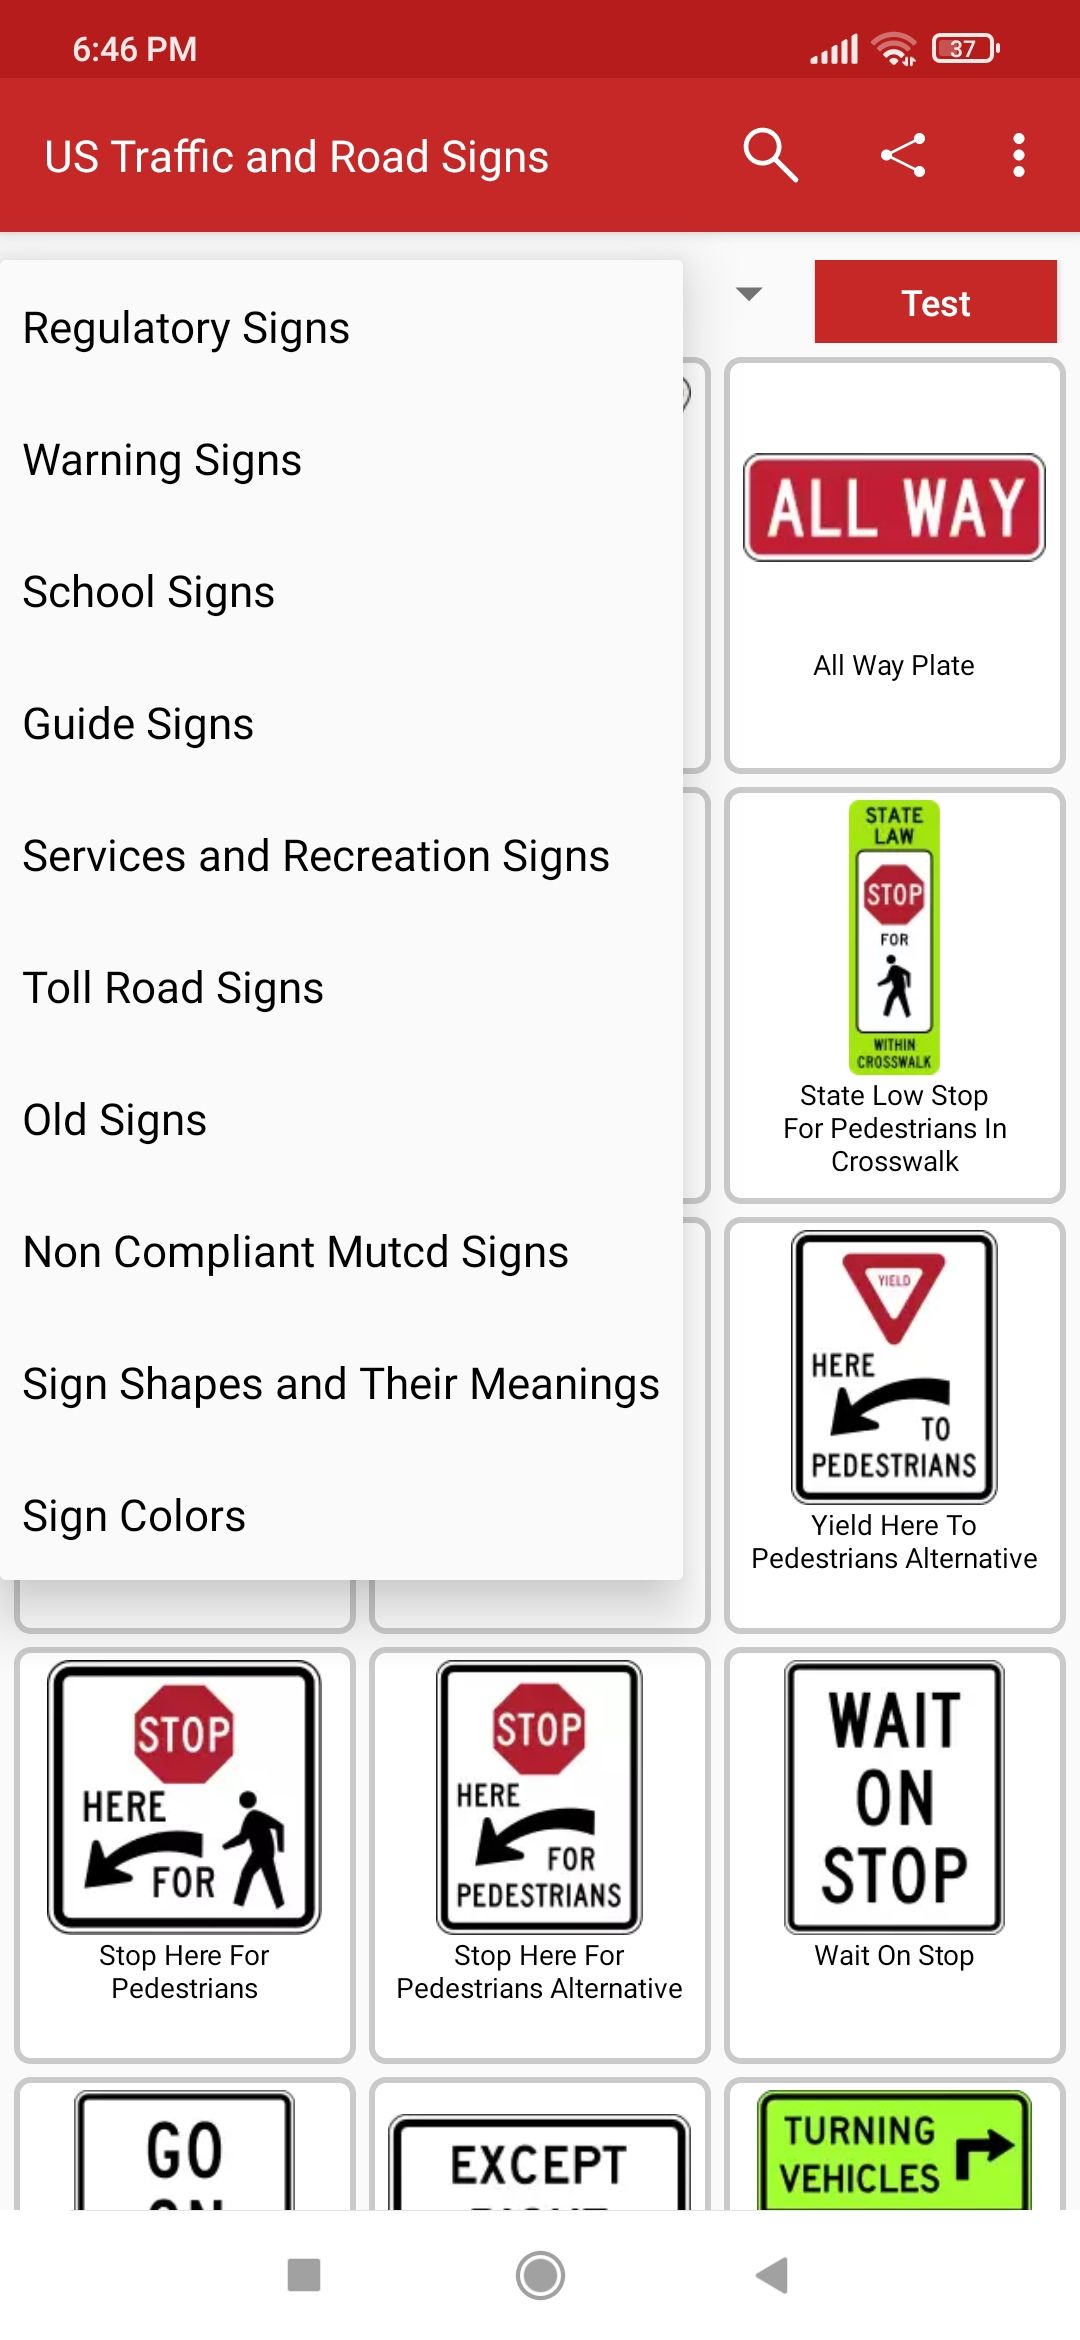 US Traffic and Road Signs app homepage